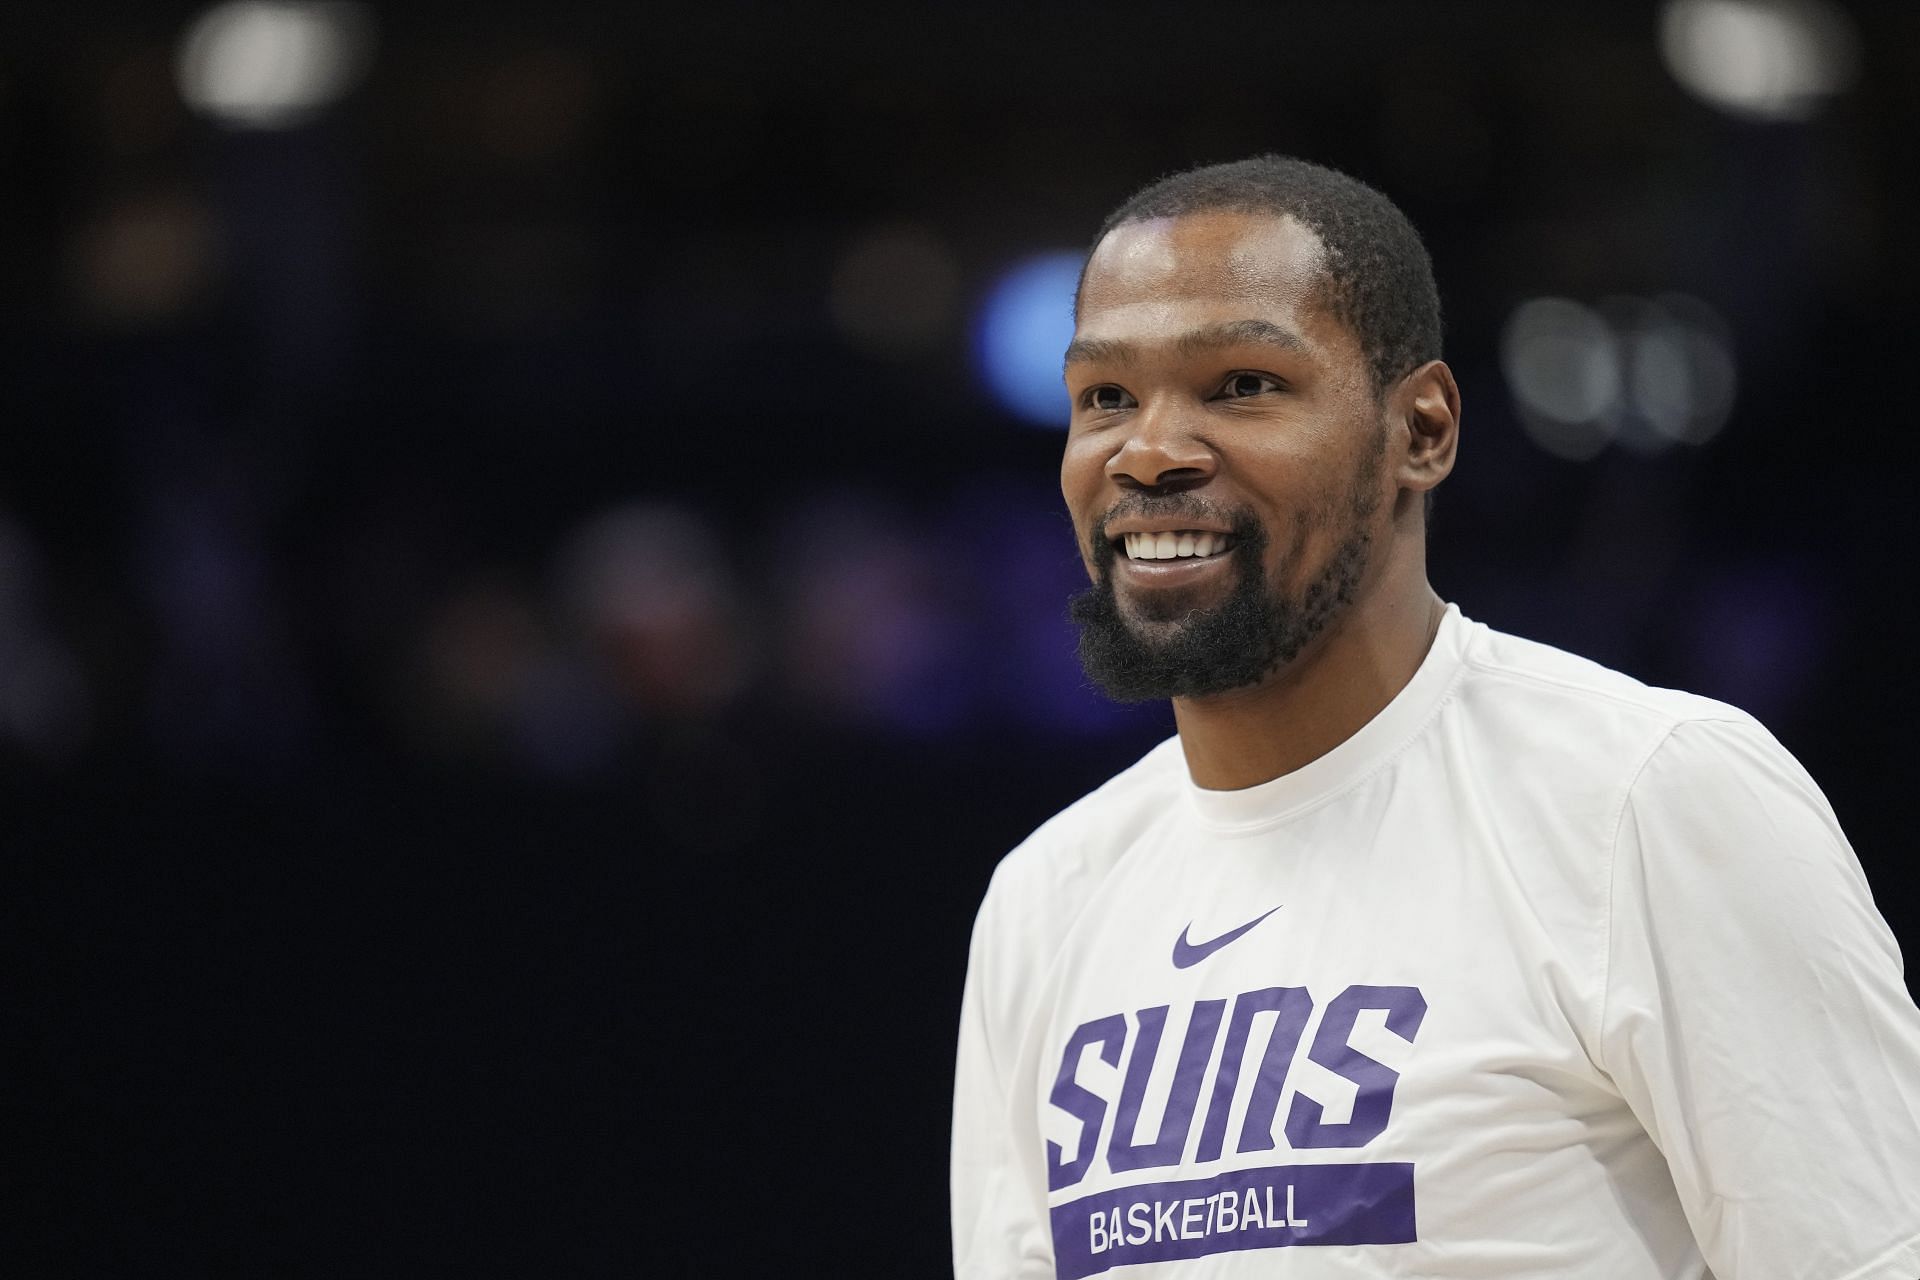 Kevin Durant will not be available when the Phoenix Suns visit the Golden State Warriors.